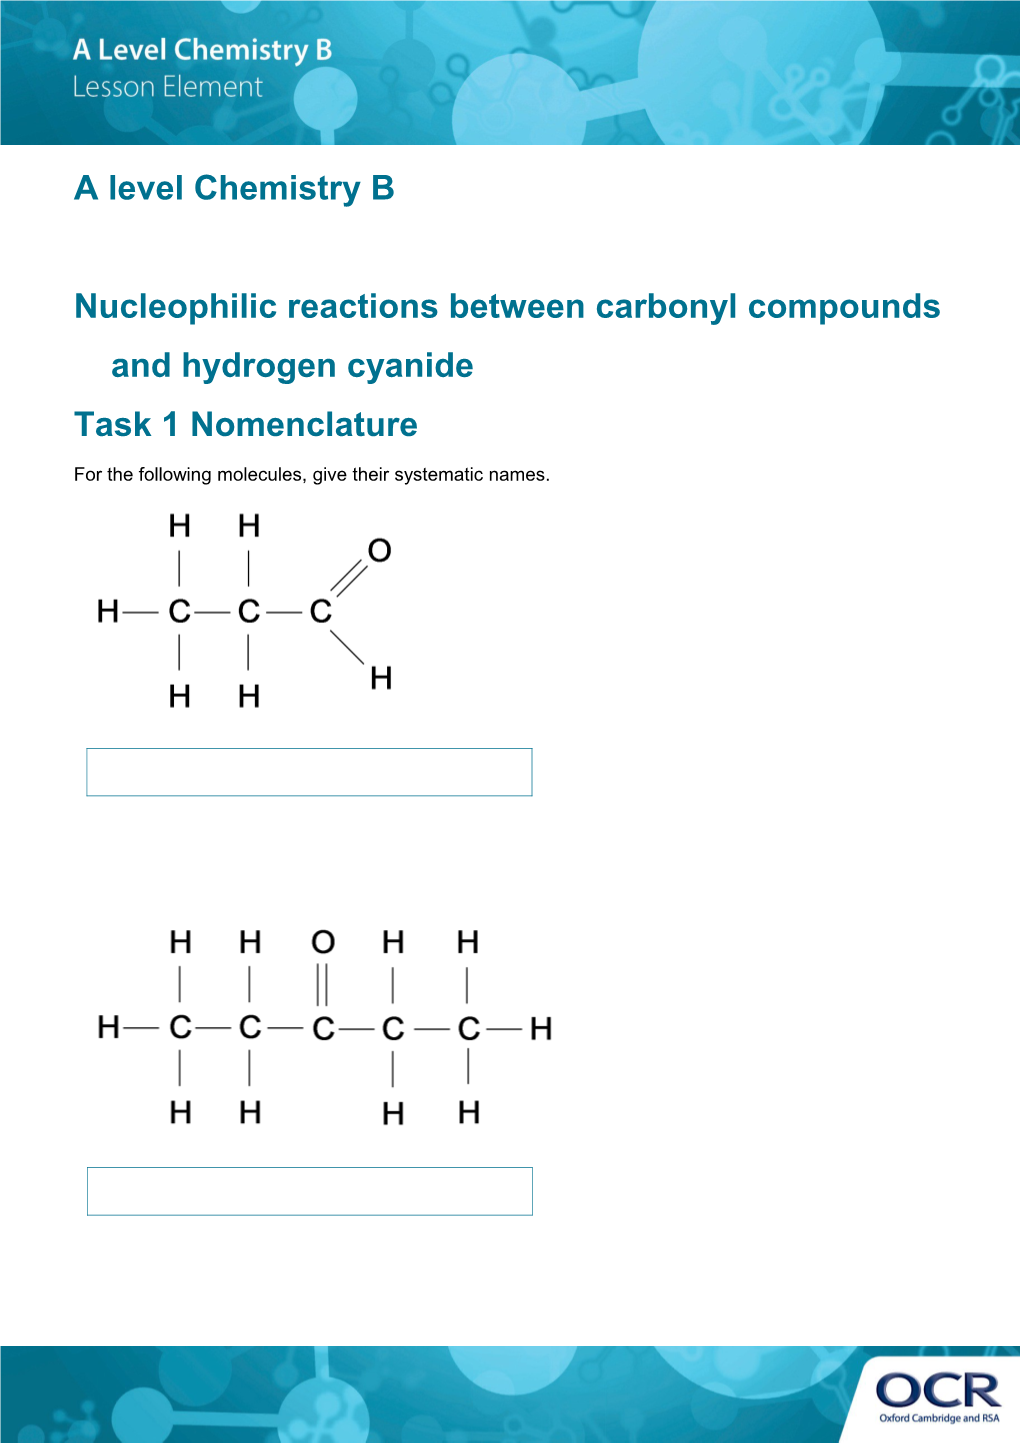 A Level Chemistry B Lesson Element Learner Activity